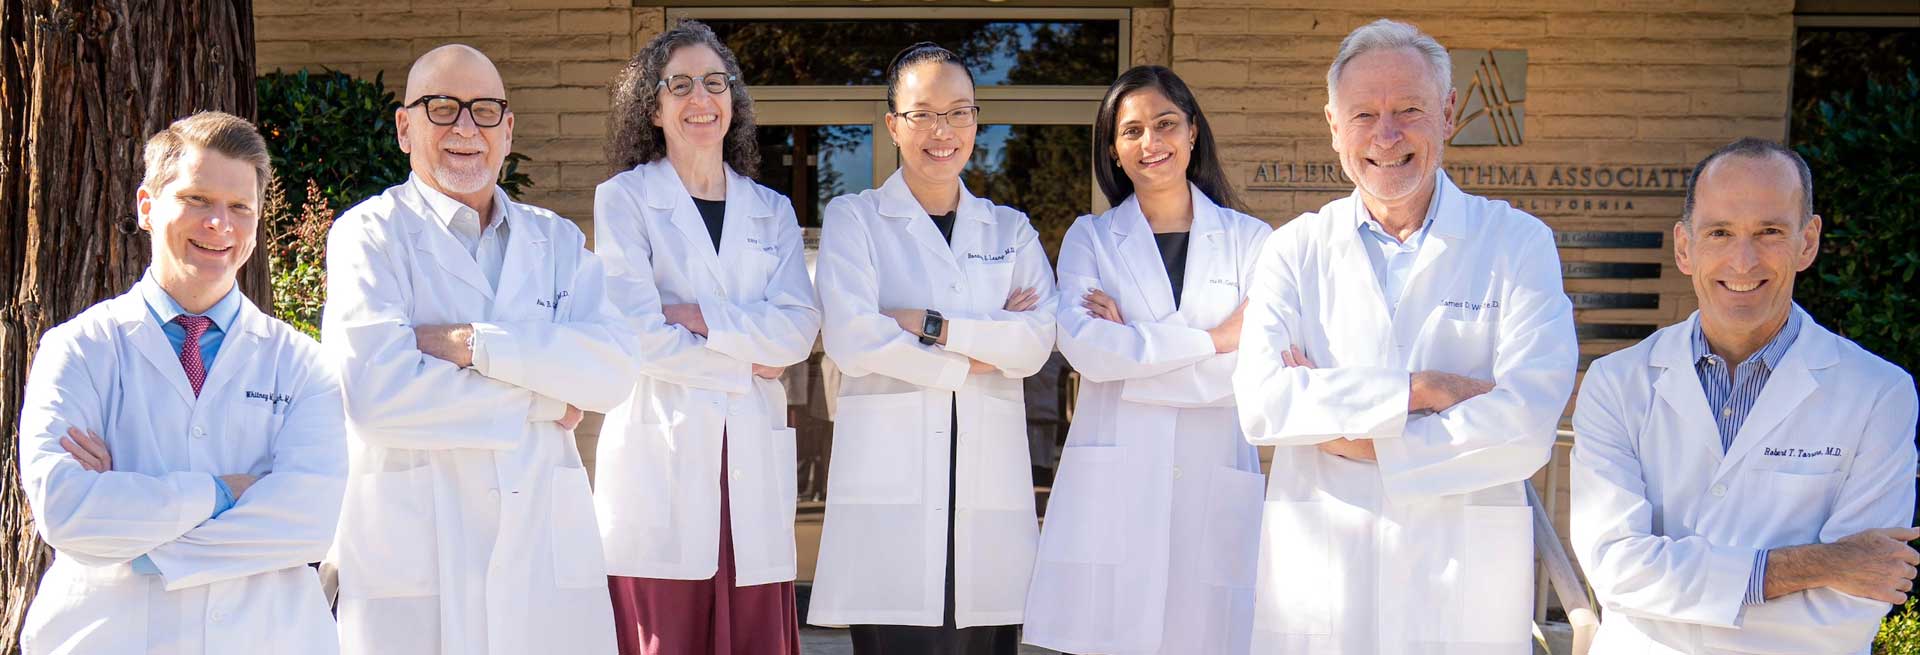 Meet the doctors of Allergy and Asthma Associates of Northern California | San Jose Allergists